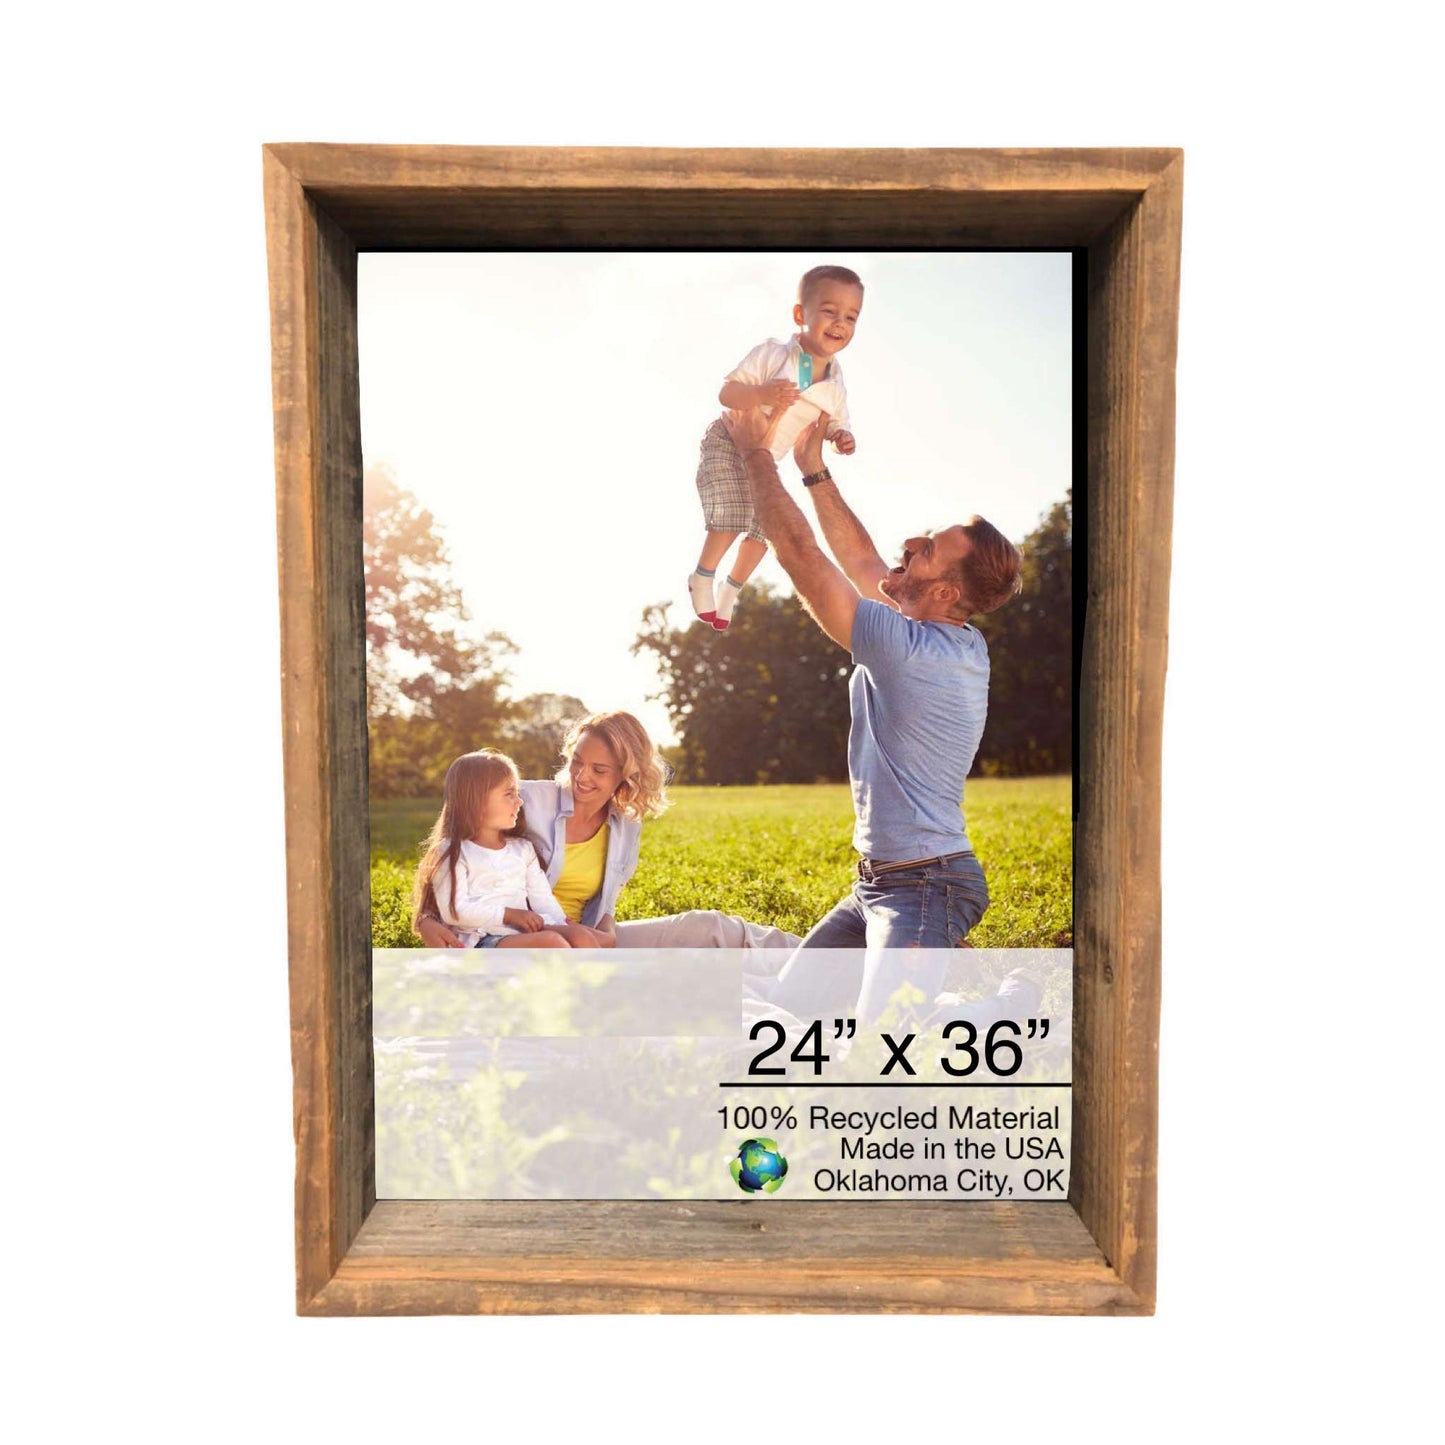 24 x 36 Gray Distressed Solid and Manufactured Wood Hanging or Tabletop Picture Frame